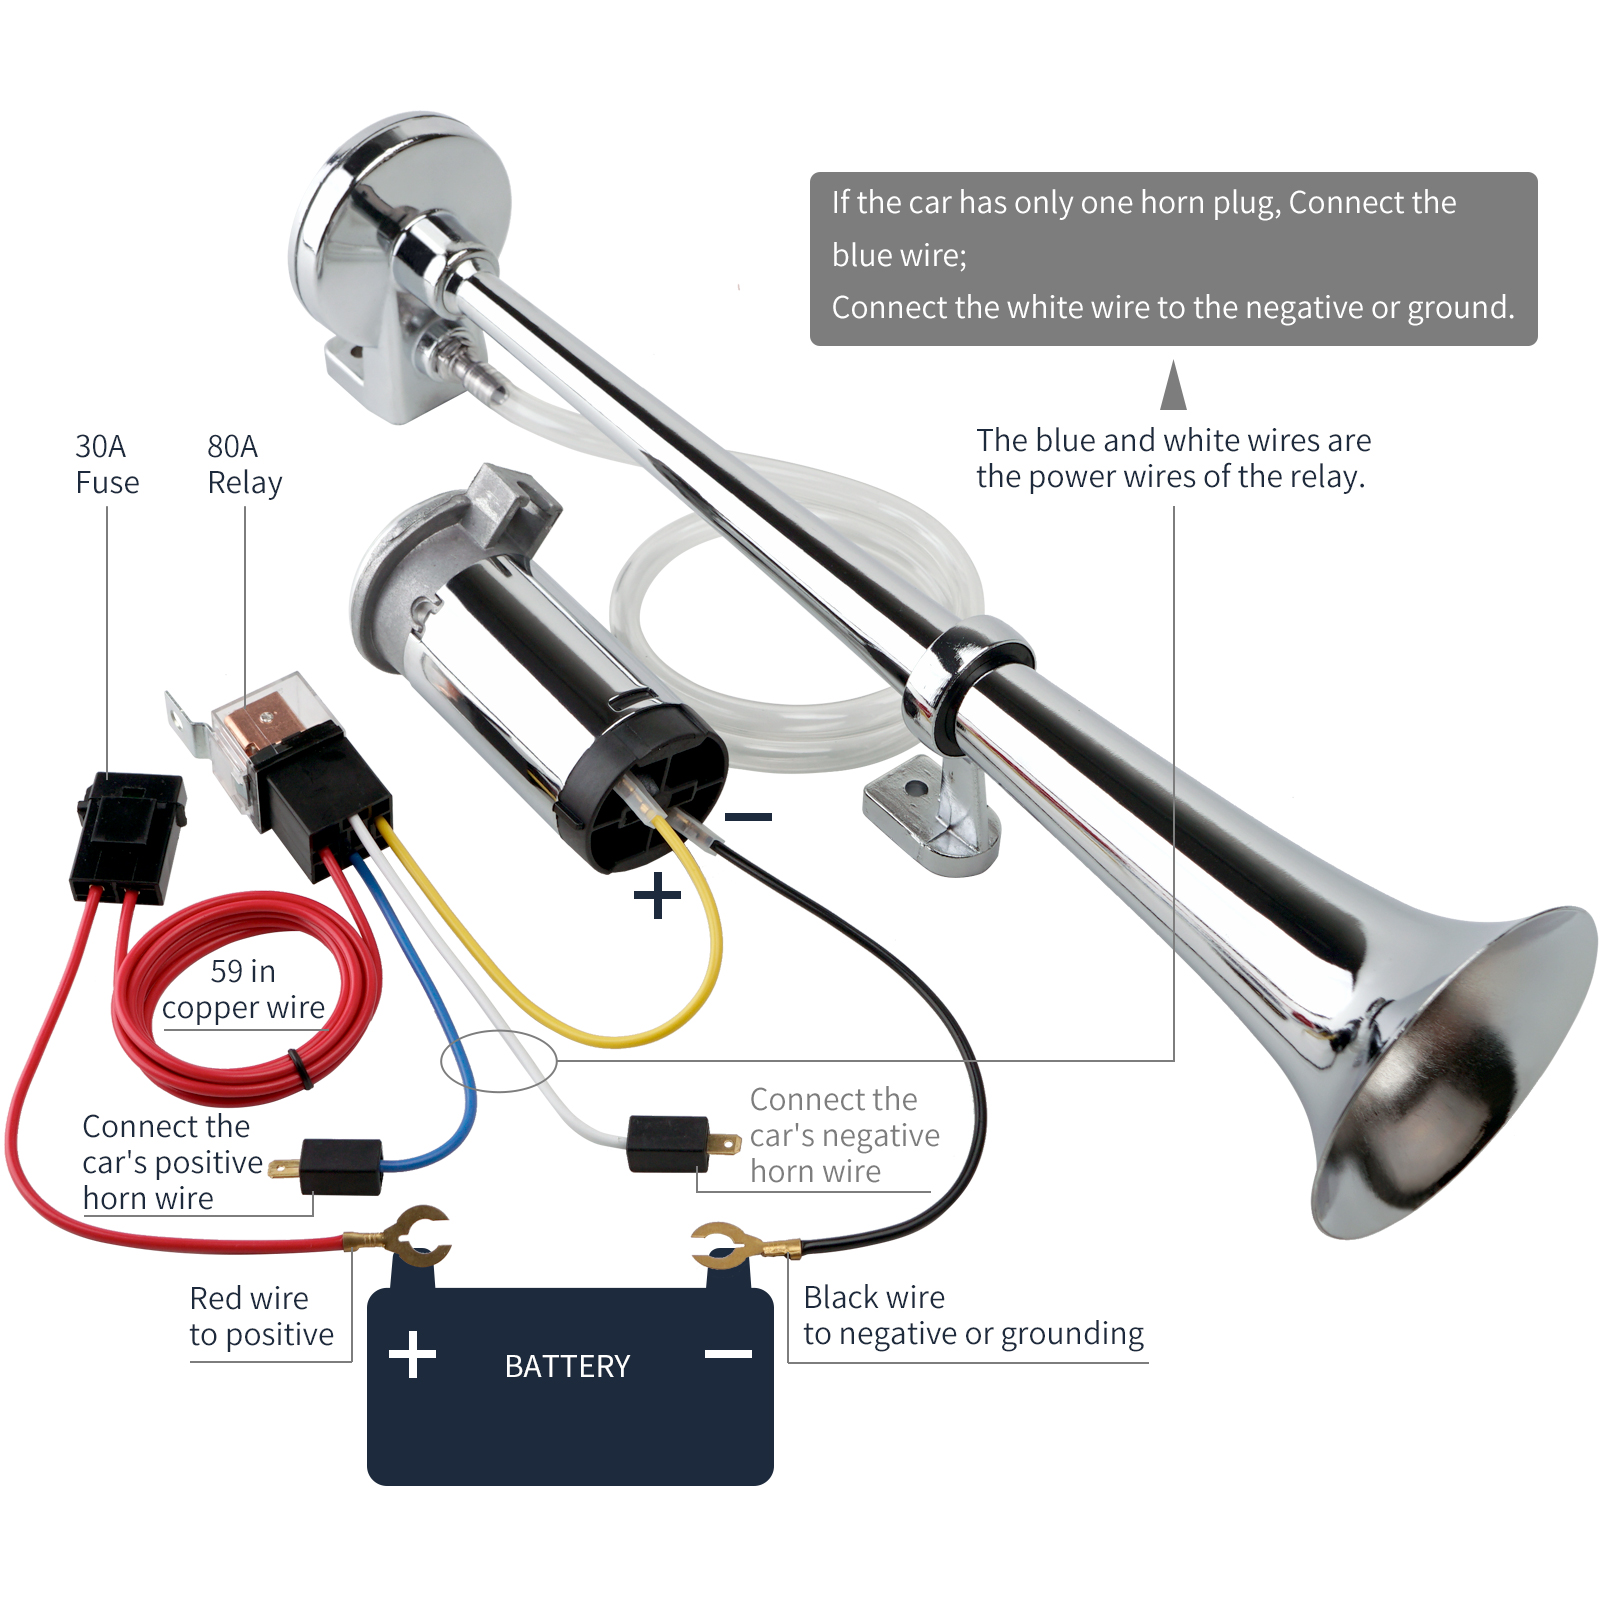 FARBIN 12V 150db Air Horn Kit, Super Loud 18 inches Chrome Zinc Single Trumpet  Truck Air Horn with Compressor and Wire Harness for Any 12V Vehicles 